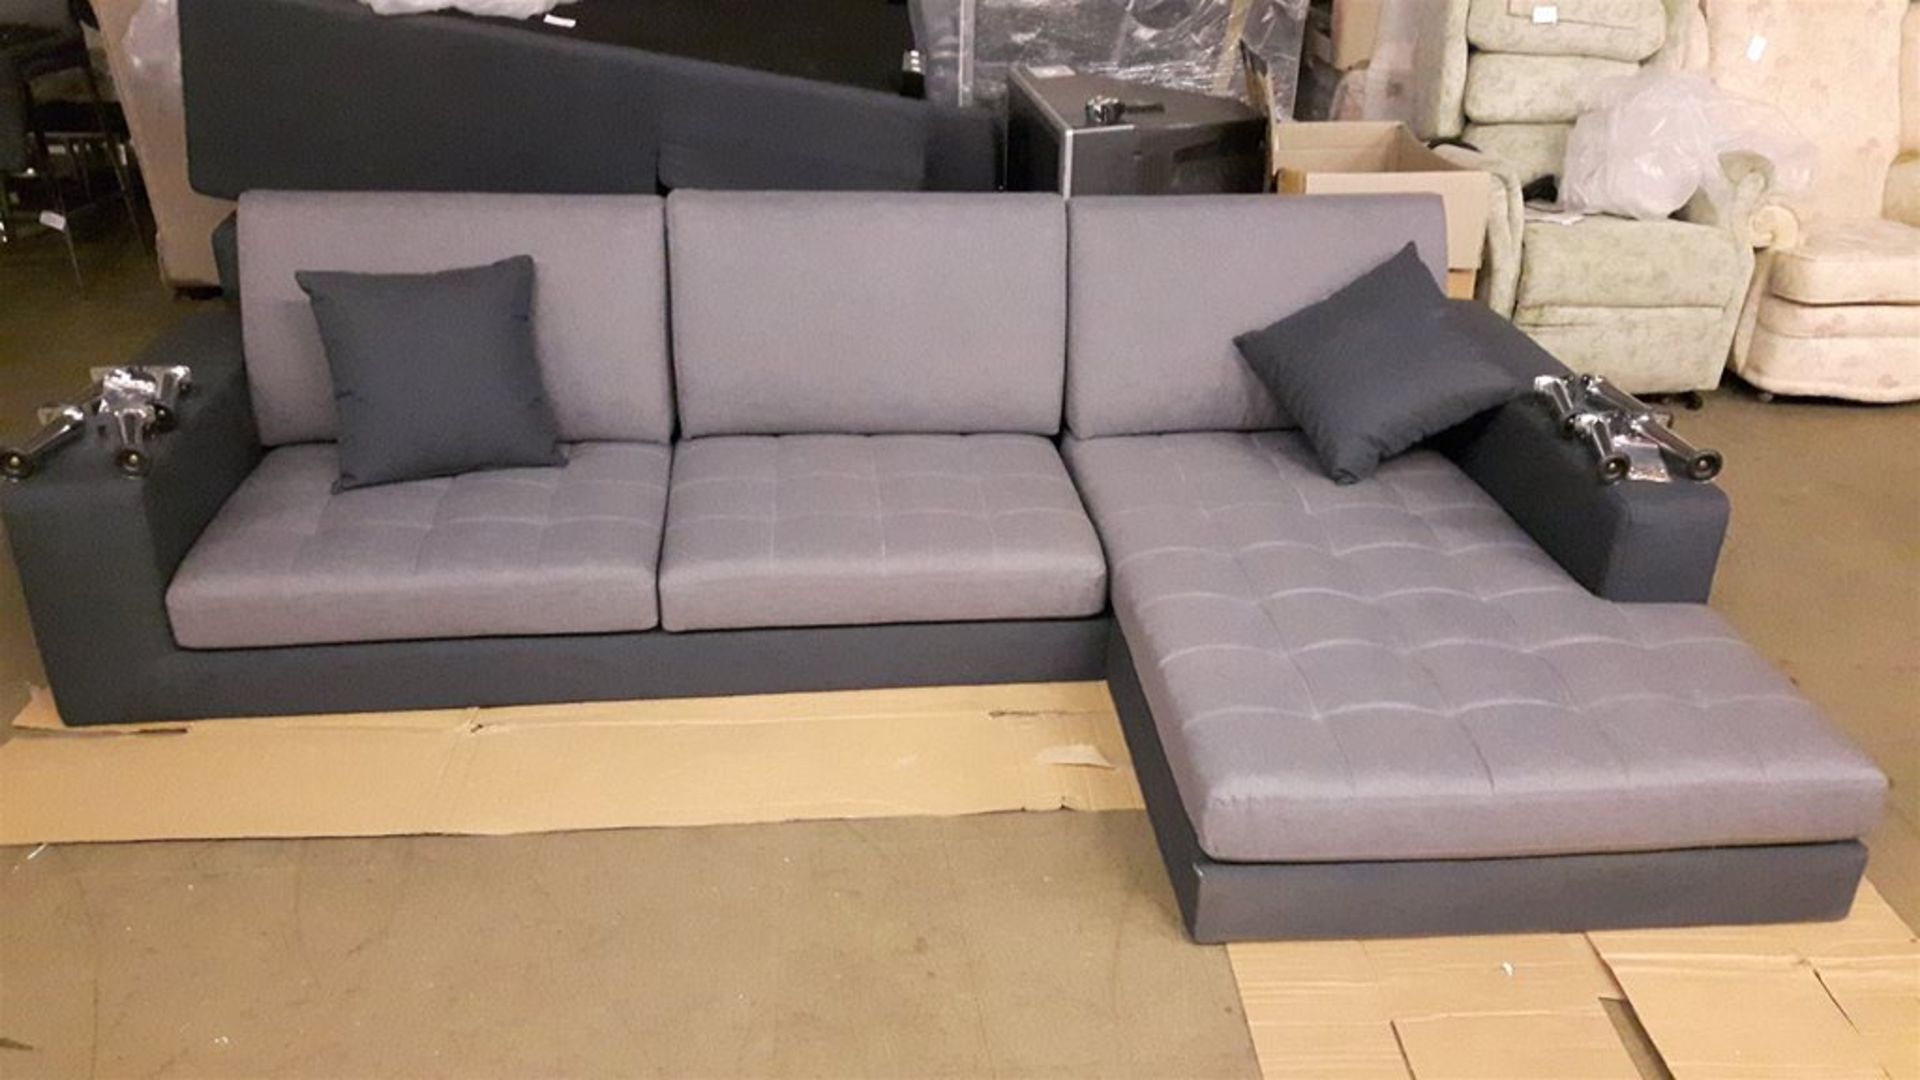 Pendbury sofa and chaise longue in grey mix.